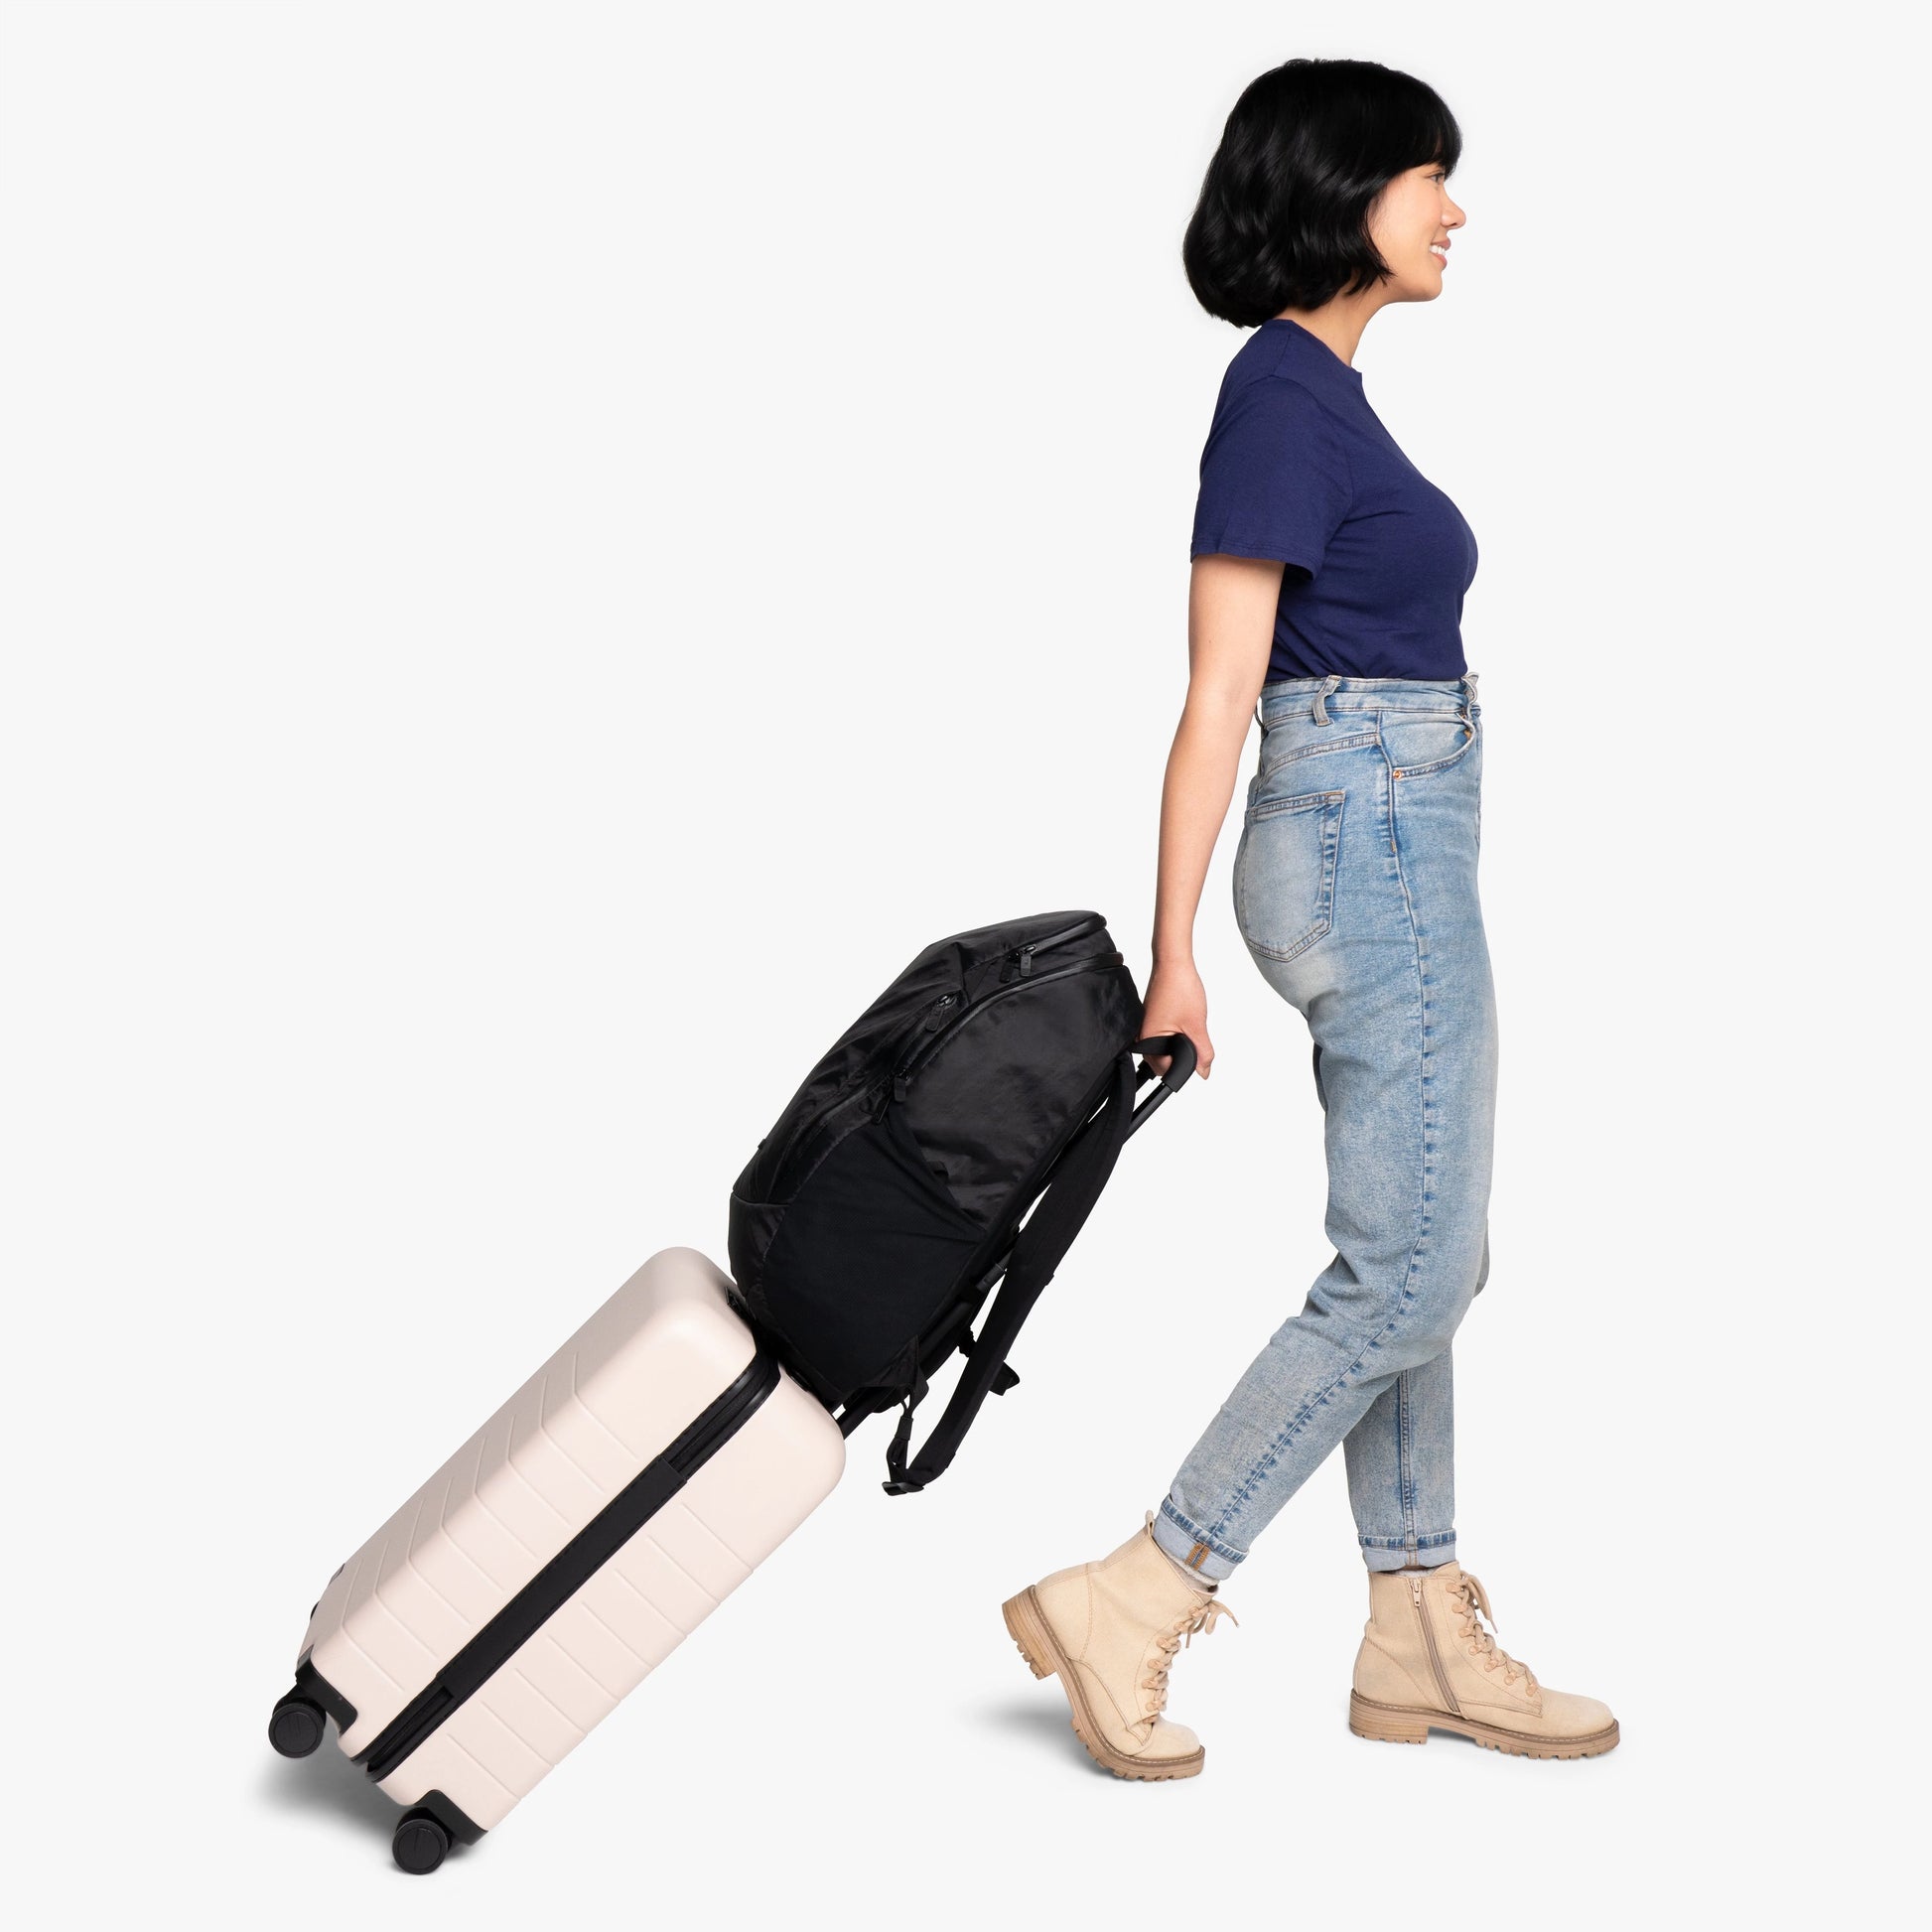 Luggage handle pass-through sleeve for upright, hands-free carry on a suitcase